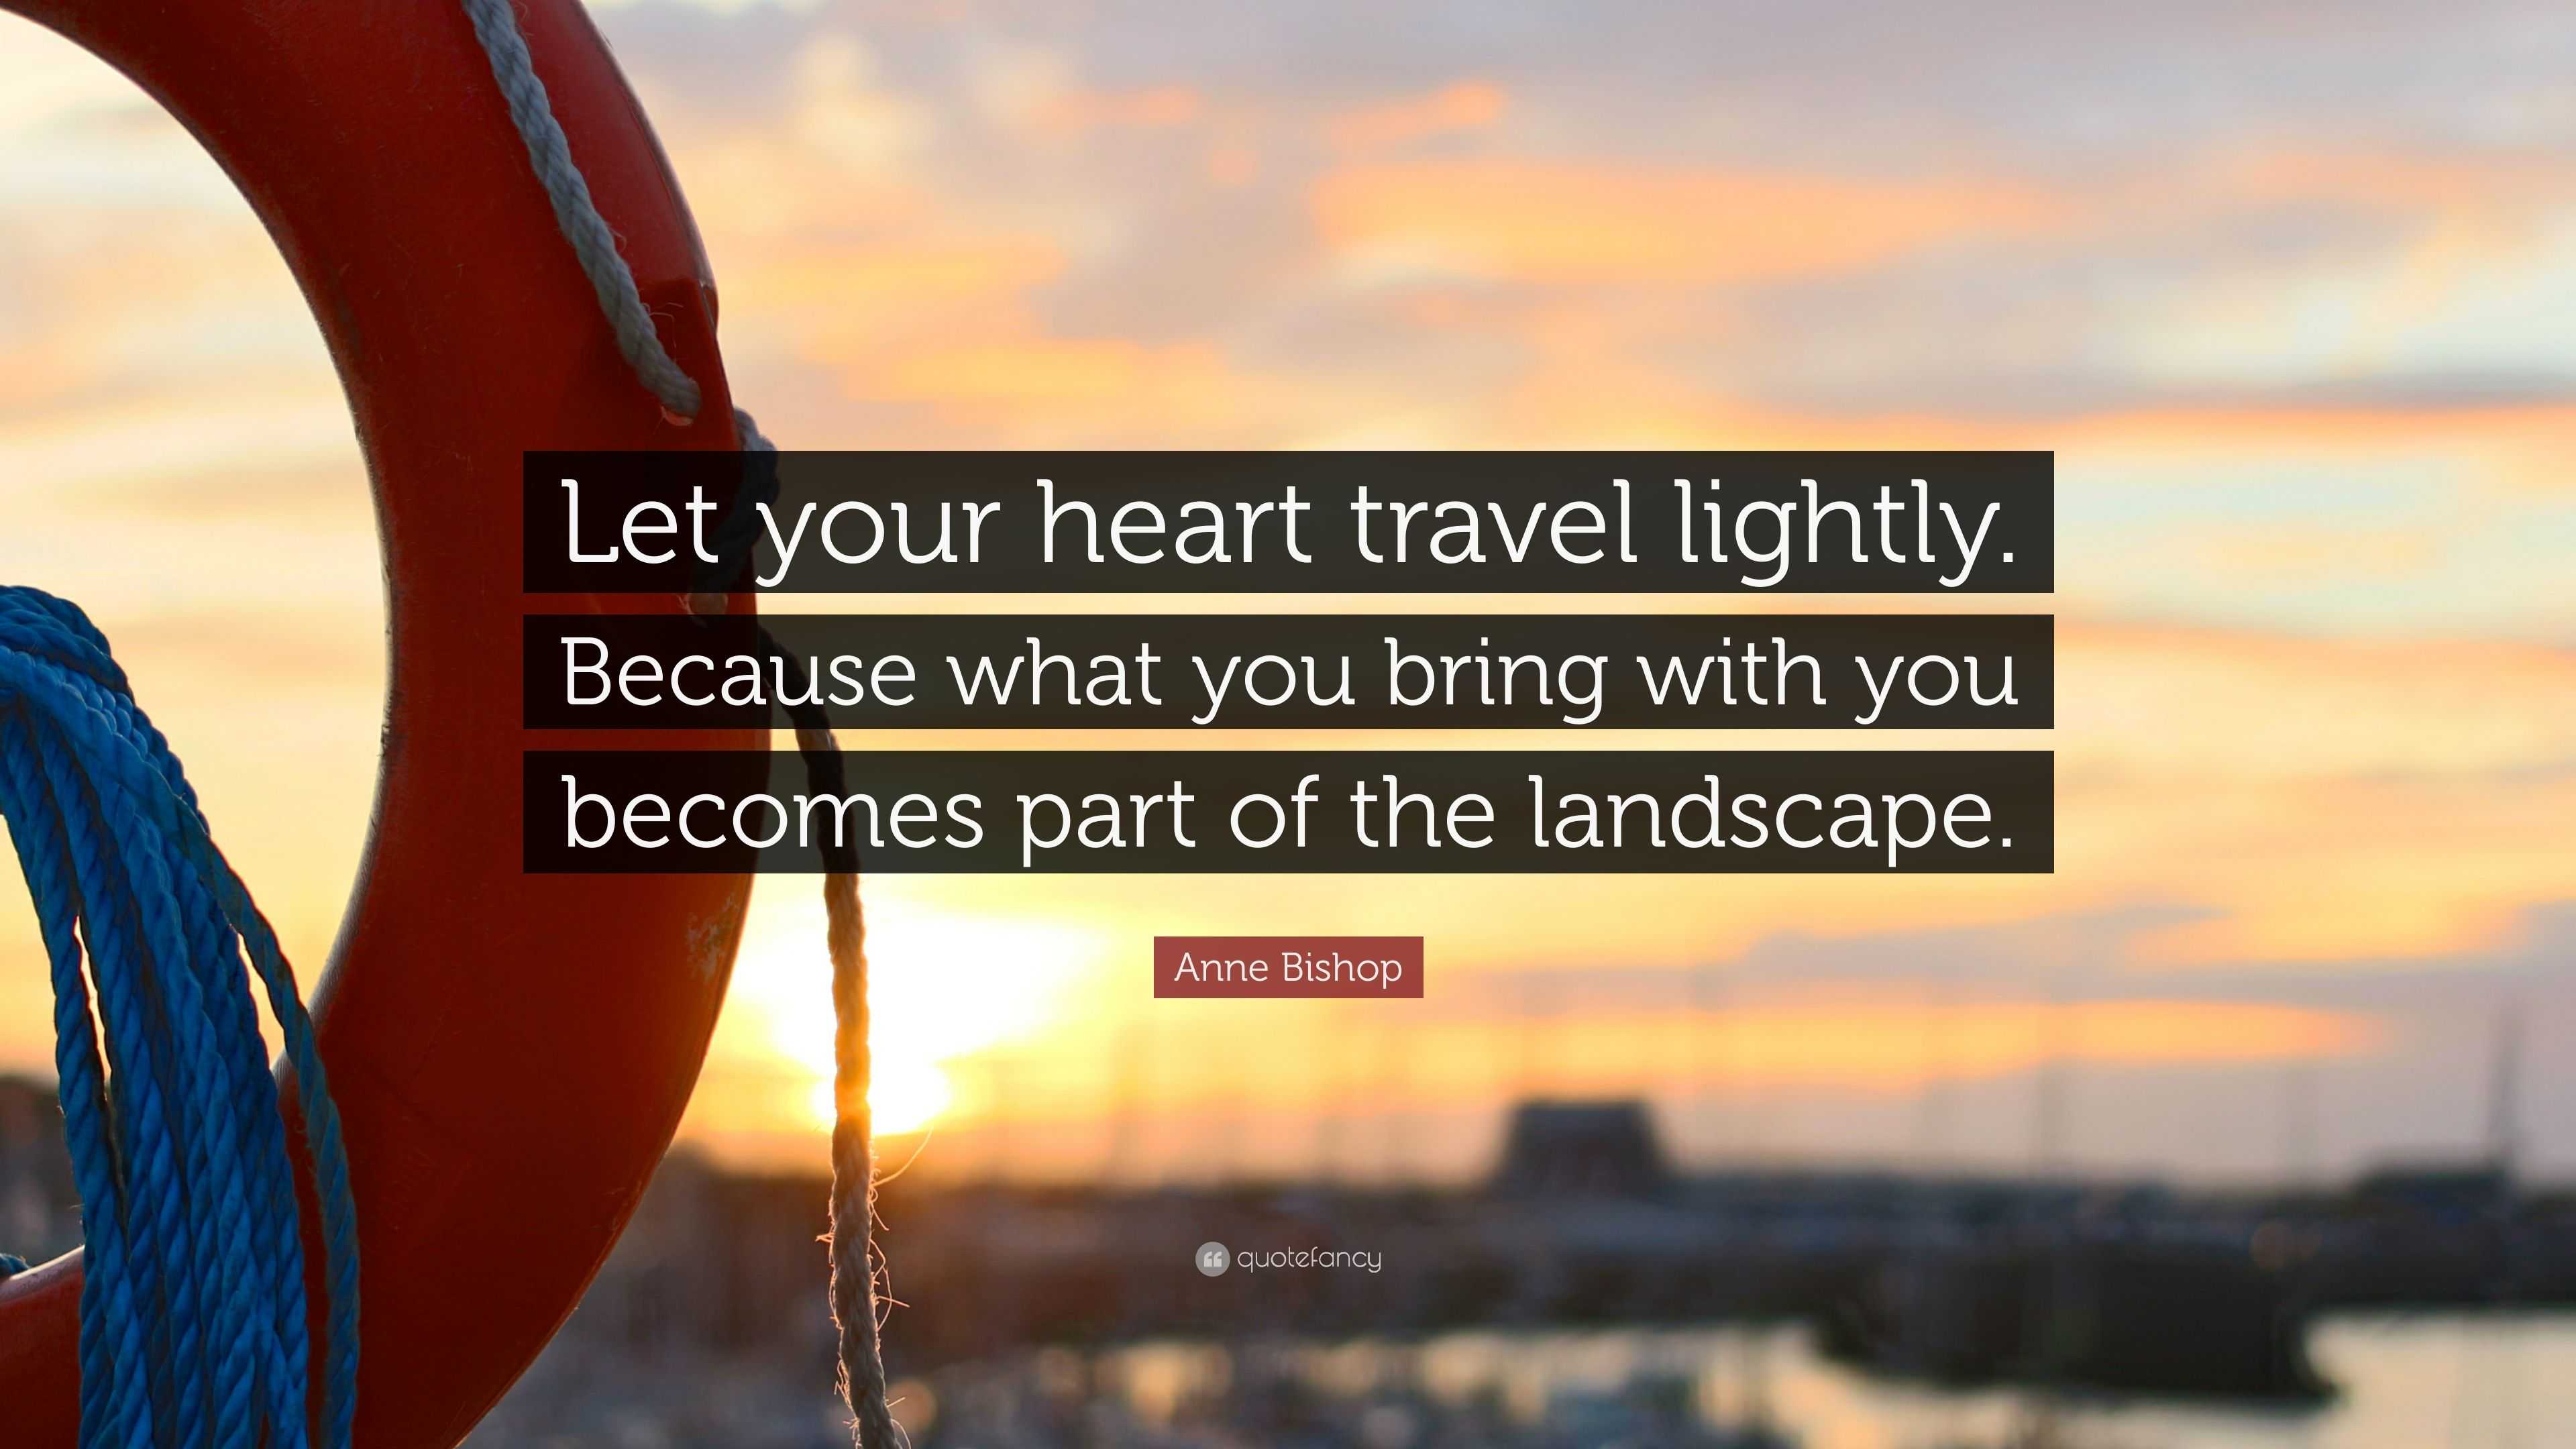 travel lightly meaning